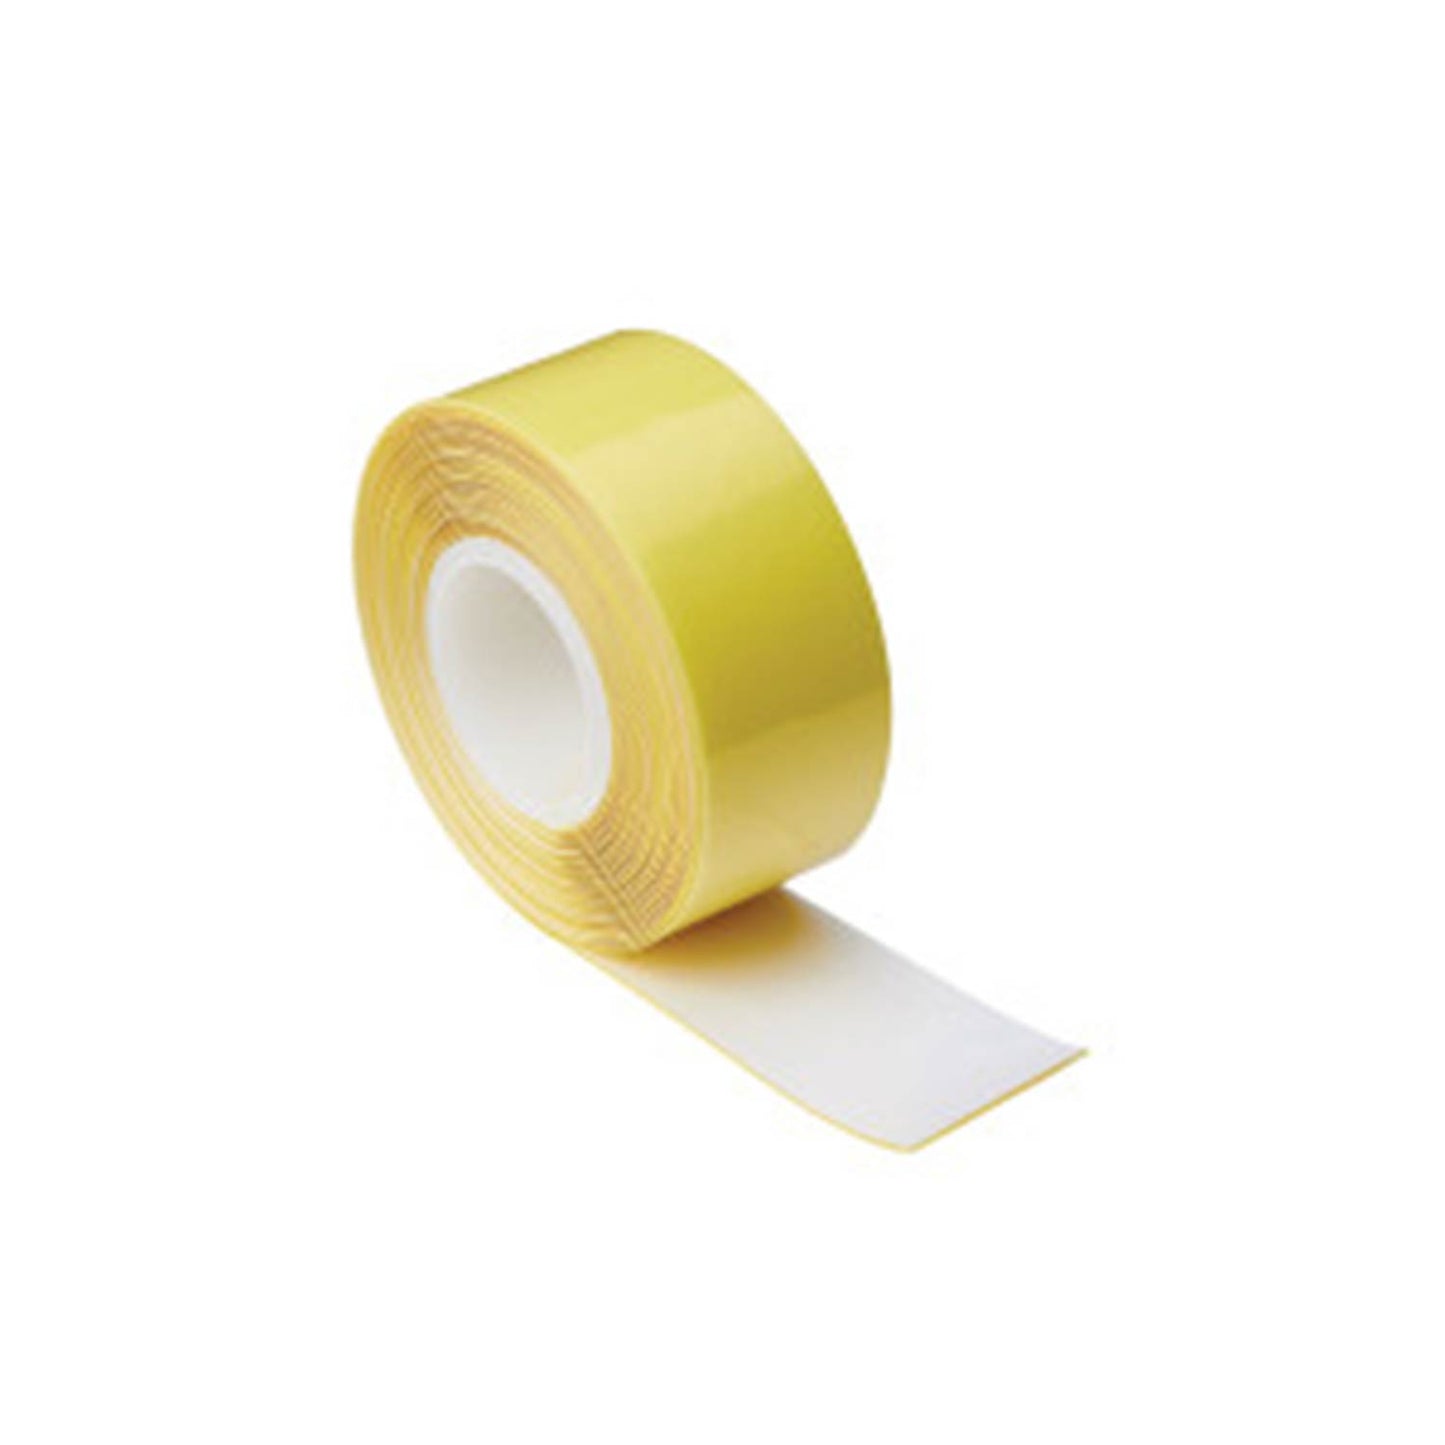 3M DBI-SALA Heavy-Duty Quick Wrap Tape II for Tool Tethering | 1500174